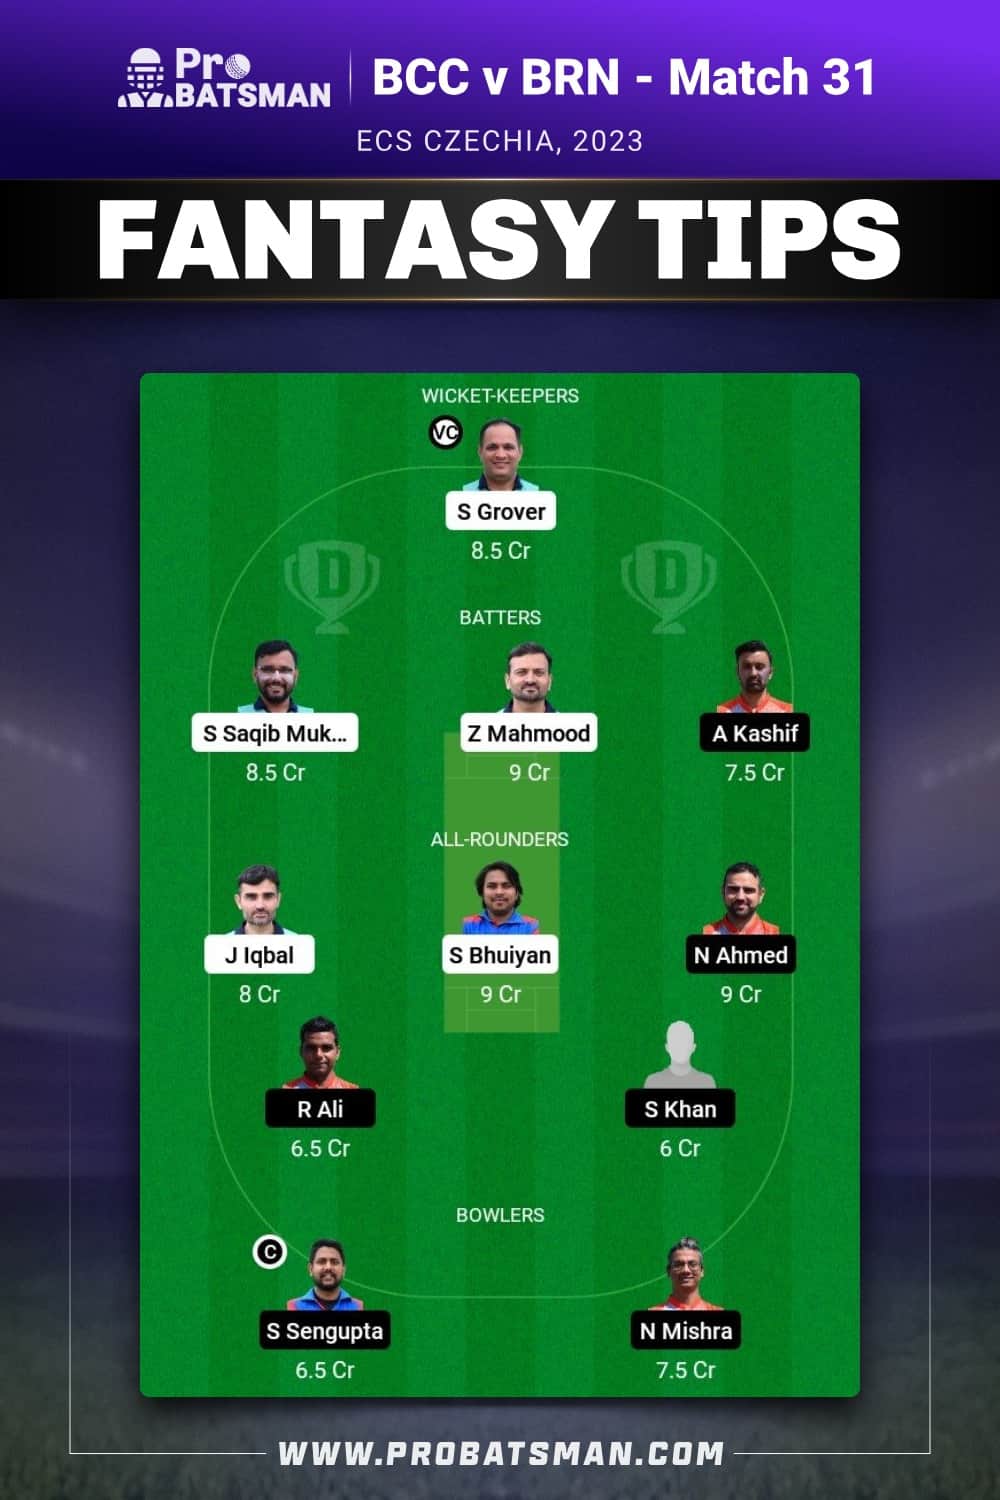 BCC vs BRN Dream11 Prediction With Stats, Pitch Report & Player Record of ECS Czechia, 2023 For Match 31